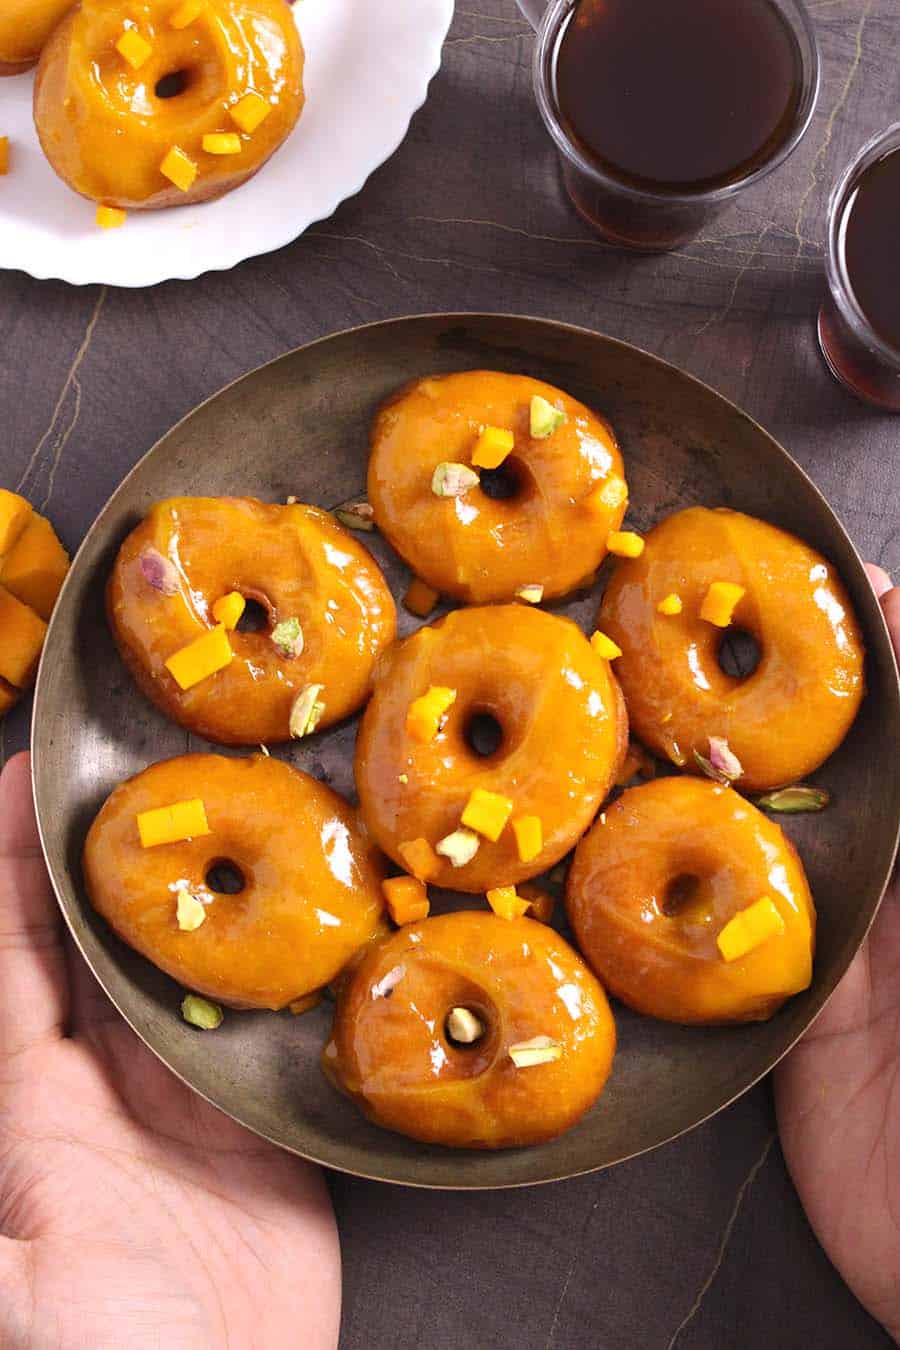 Best homemade vegan donughnuts or donuts, how to make icing ? 